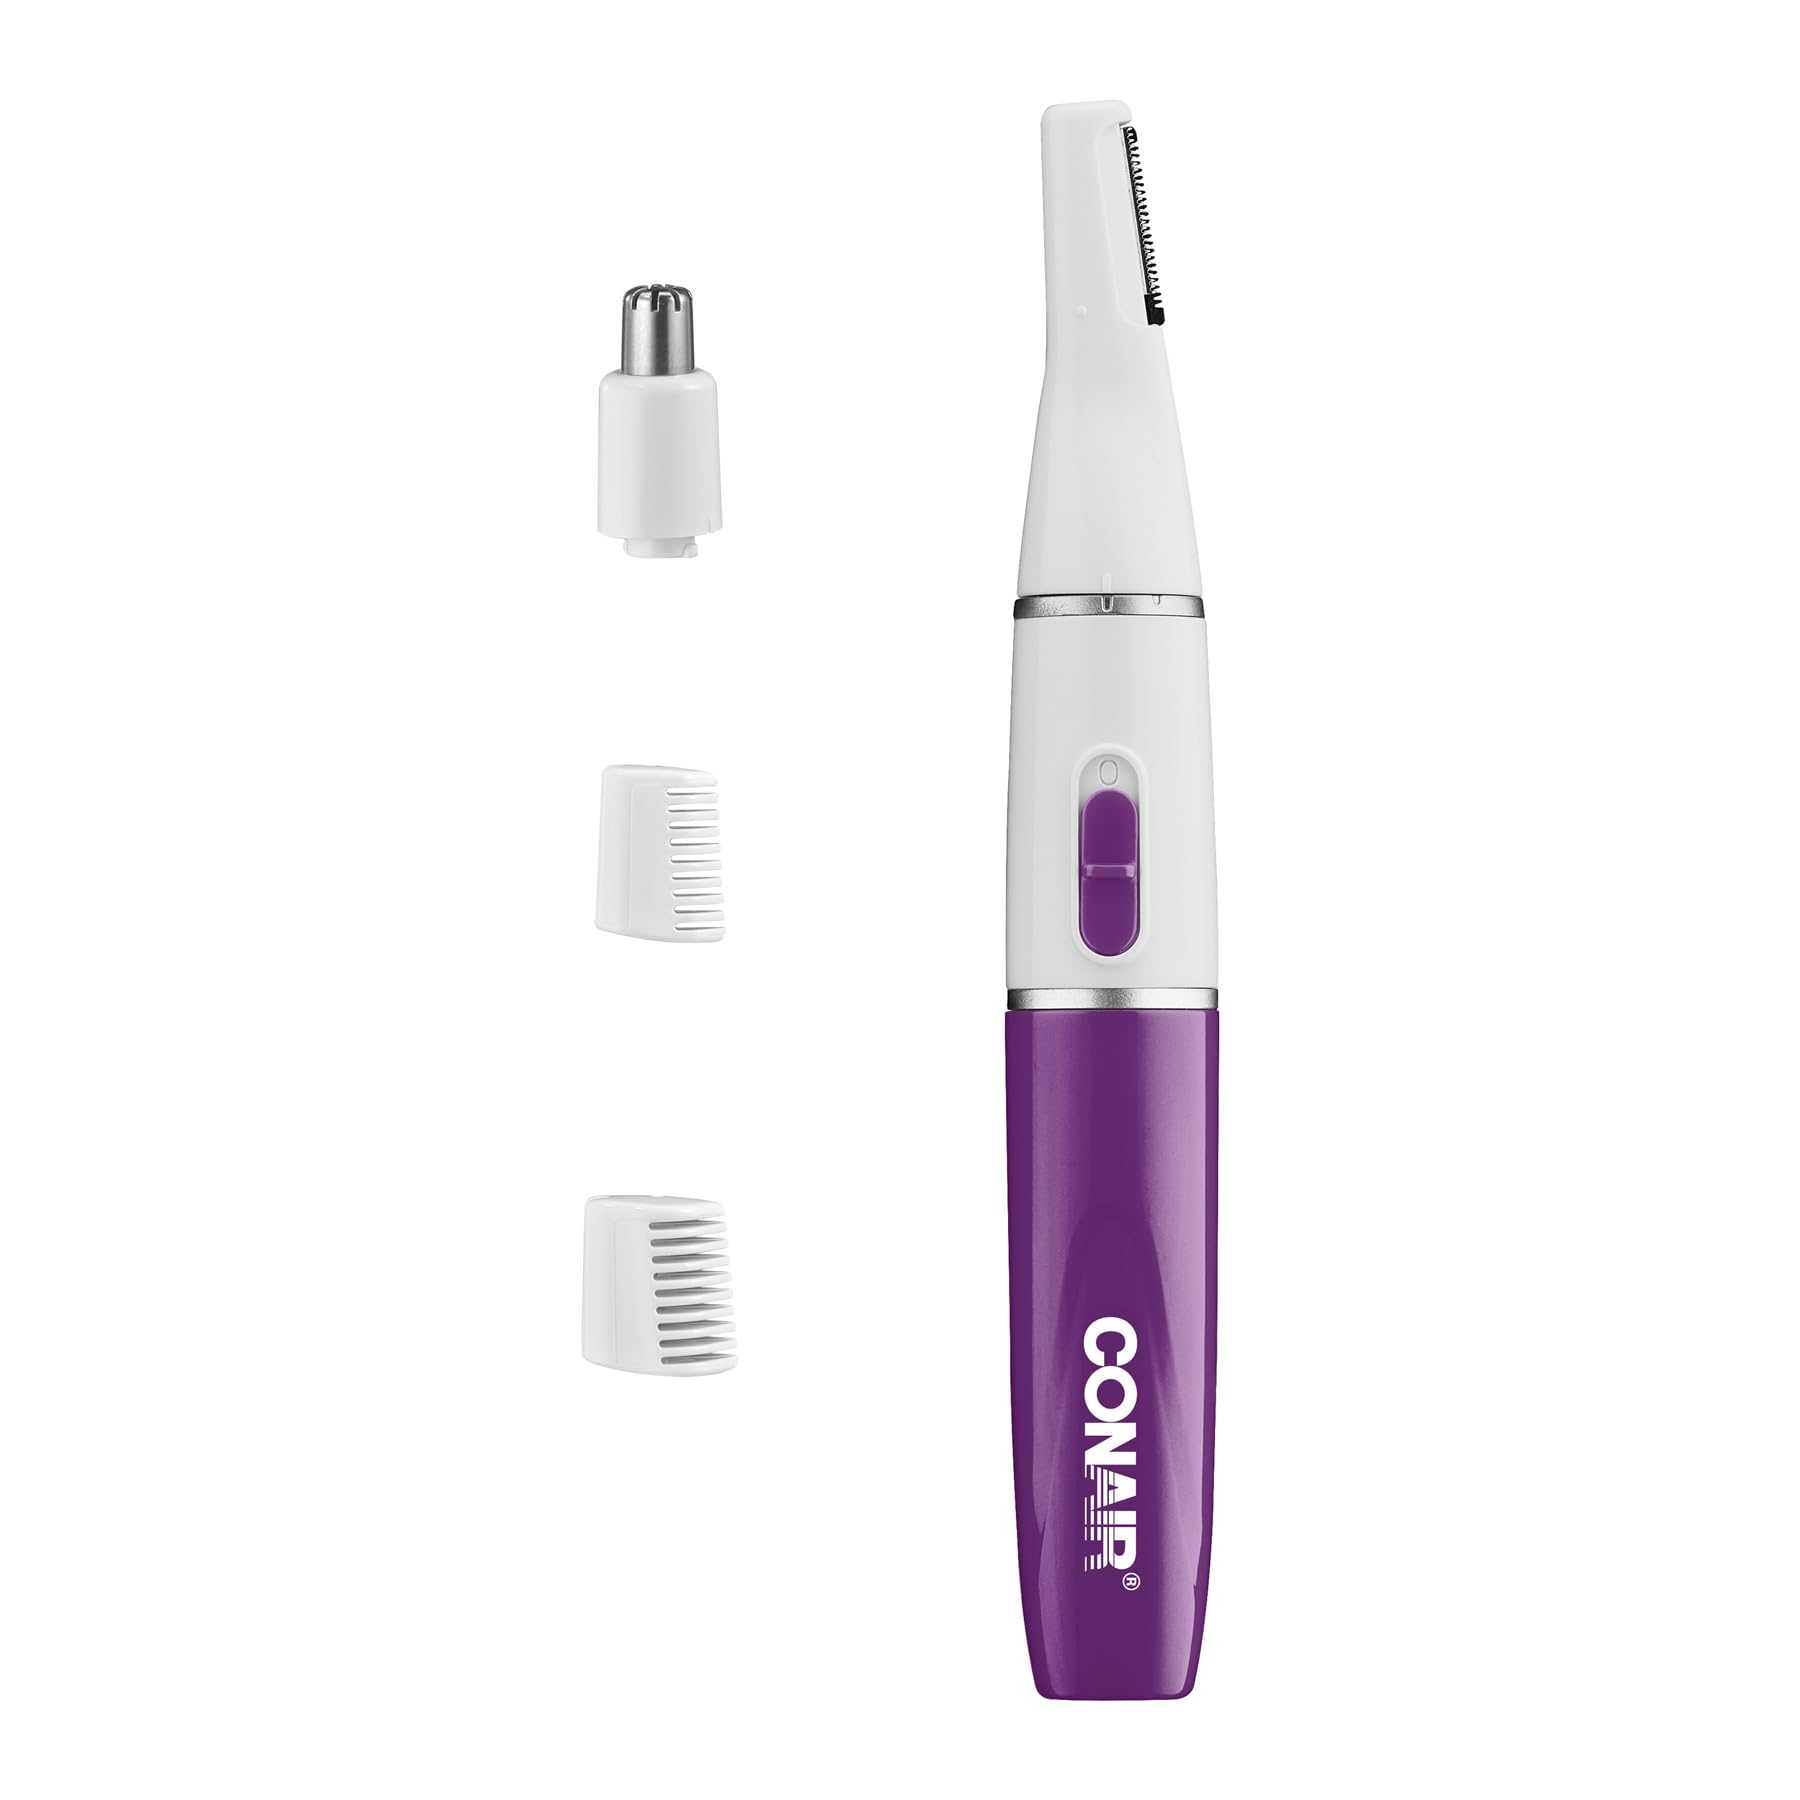 Conair All-in-1 Facial Hair Trimmer for Women, Perfect for Face, Ear/Nose and Eyebrows, Battery-Powered